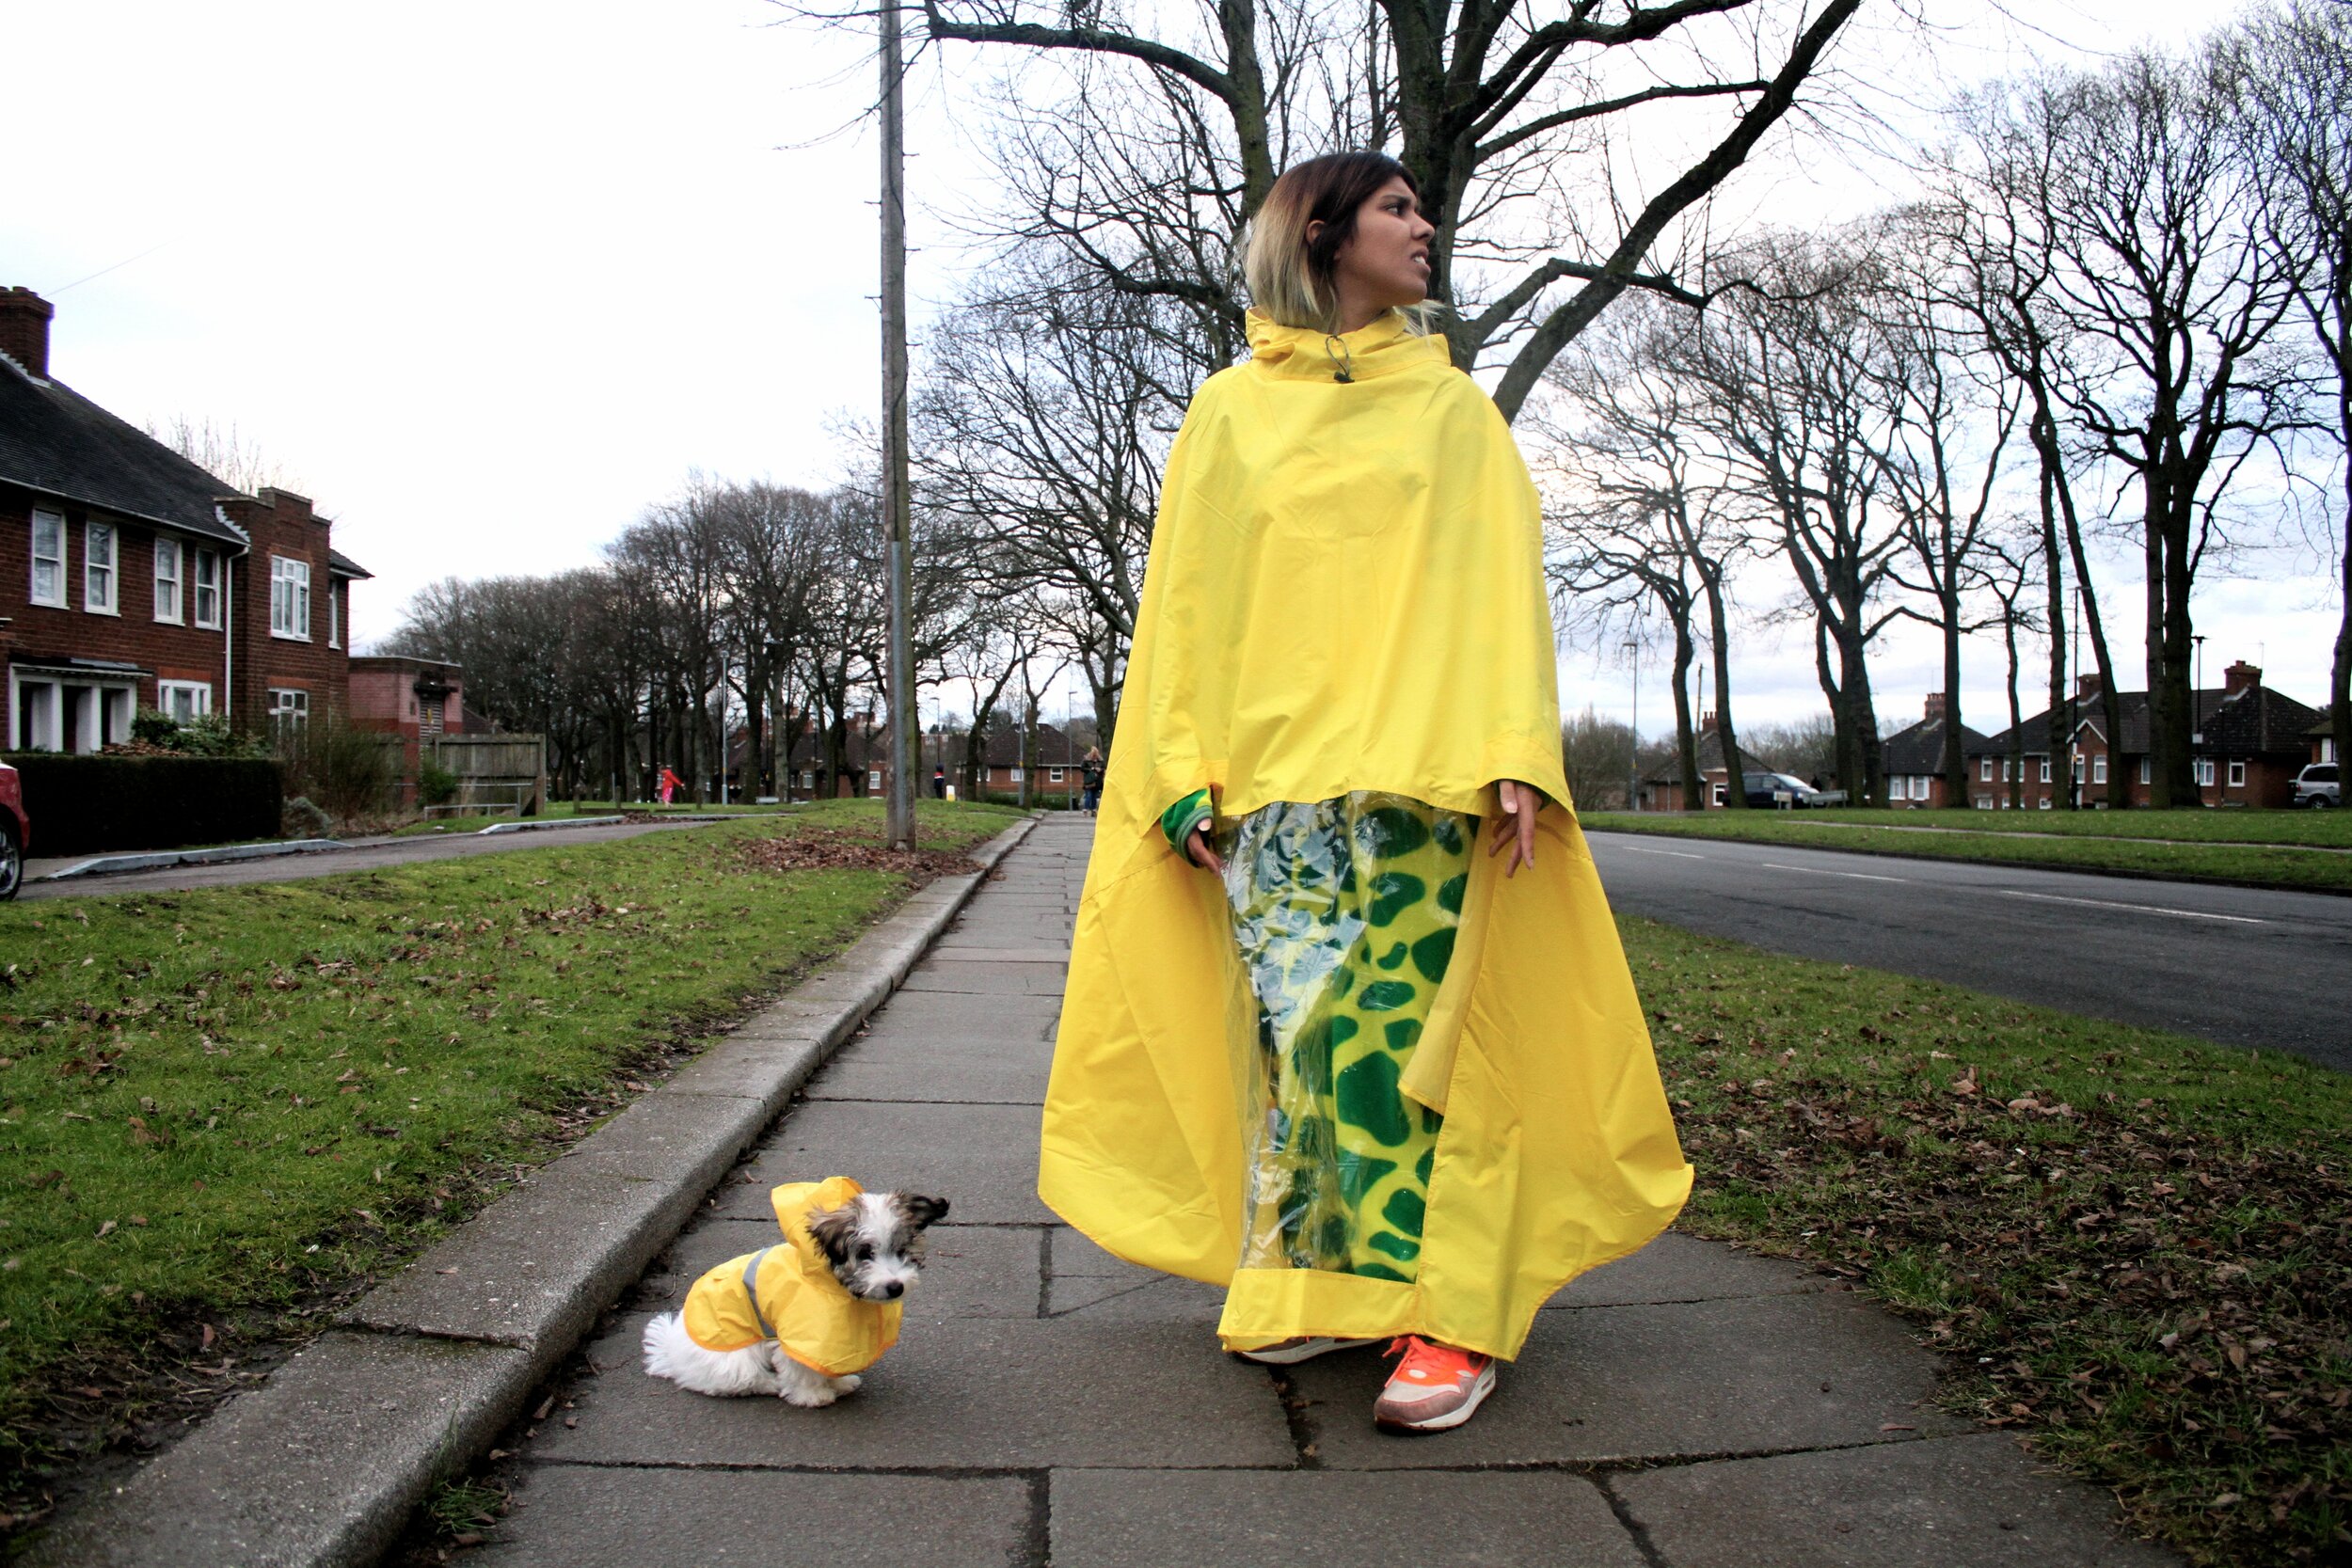  Image description: A woman dressed in a large yellow rain coat is in the street with a tiny white dog sitting next to her.  